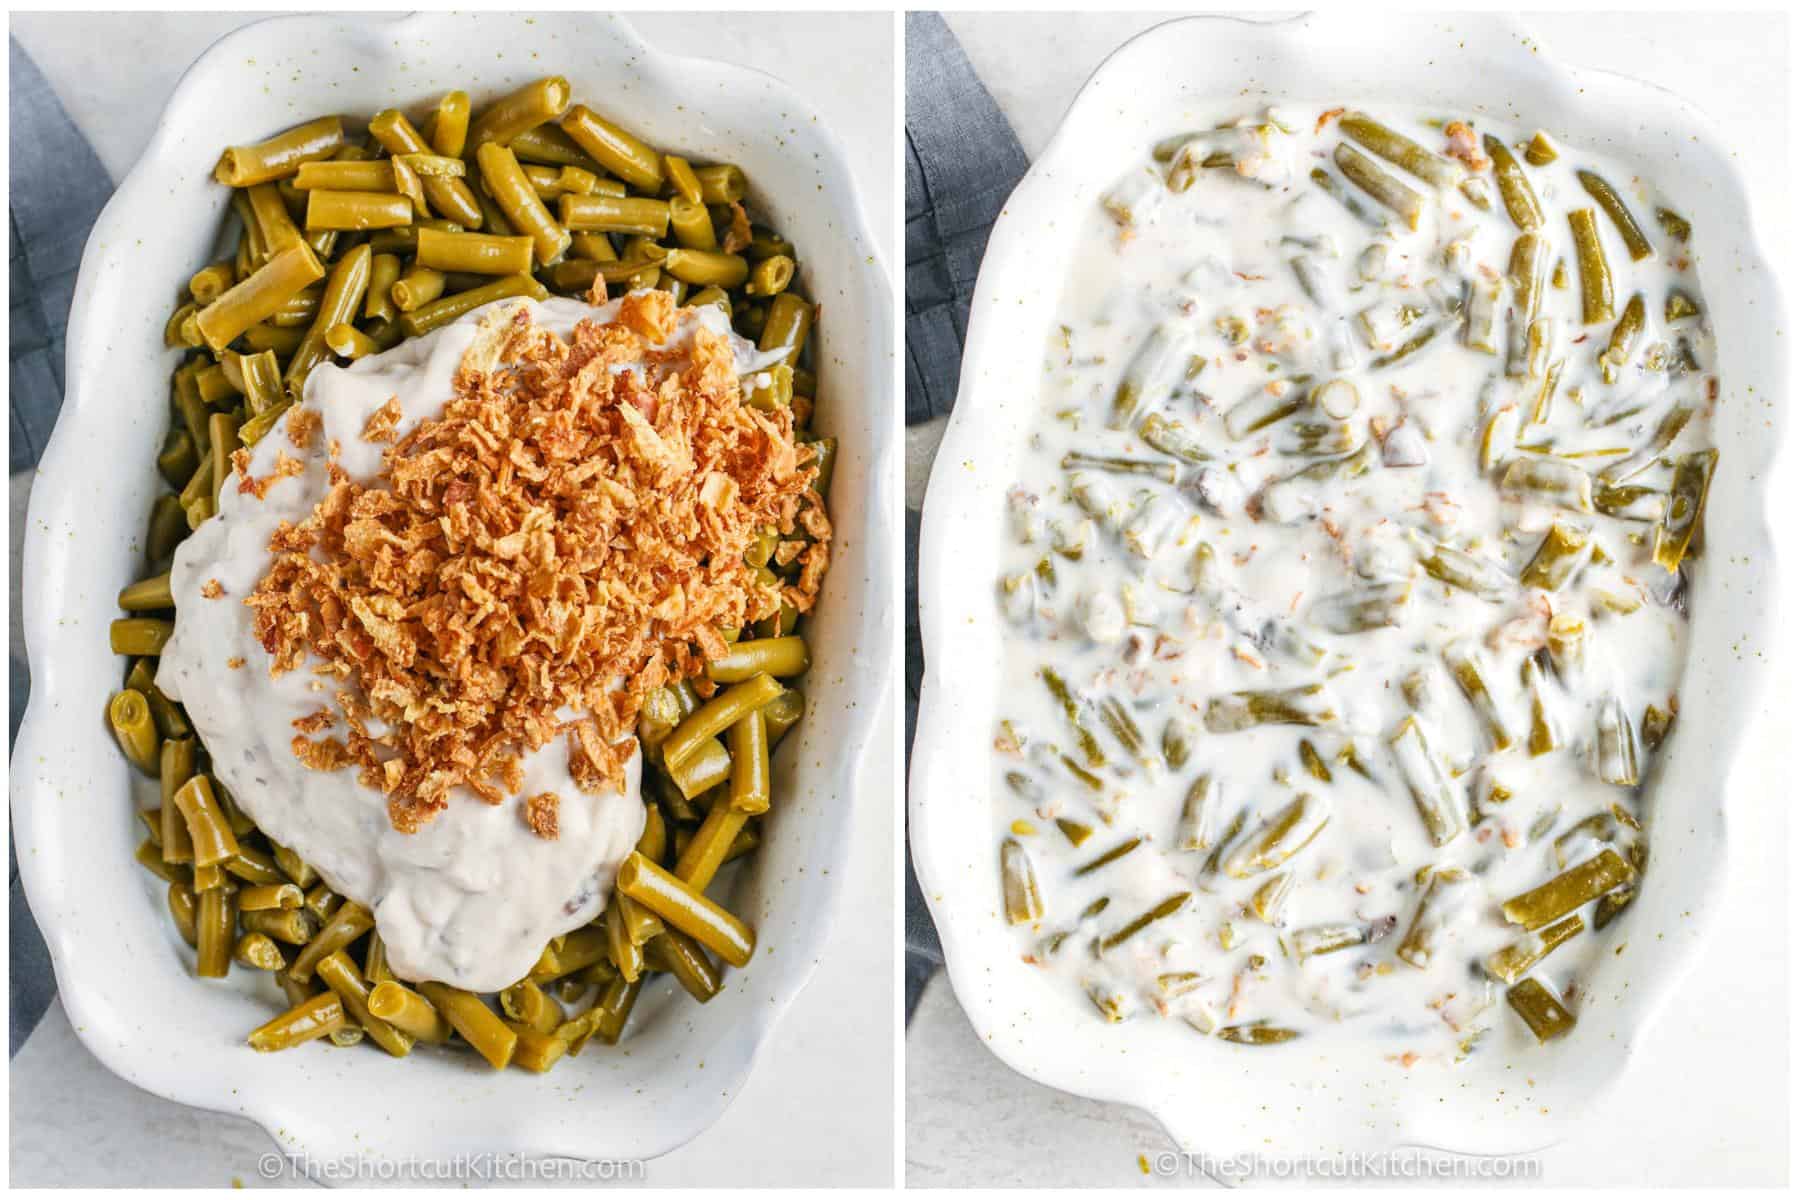 process of mixing ingredients together to make Canned Green Bean Casserole